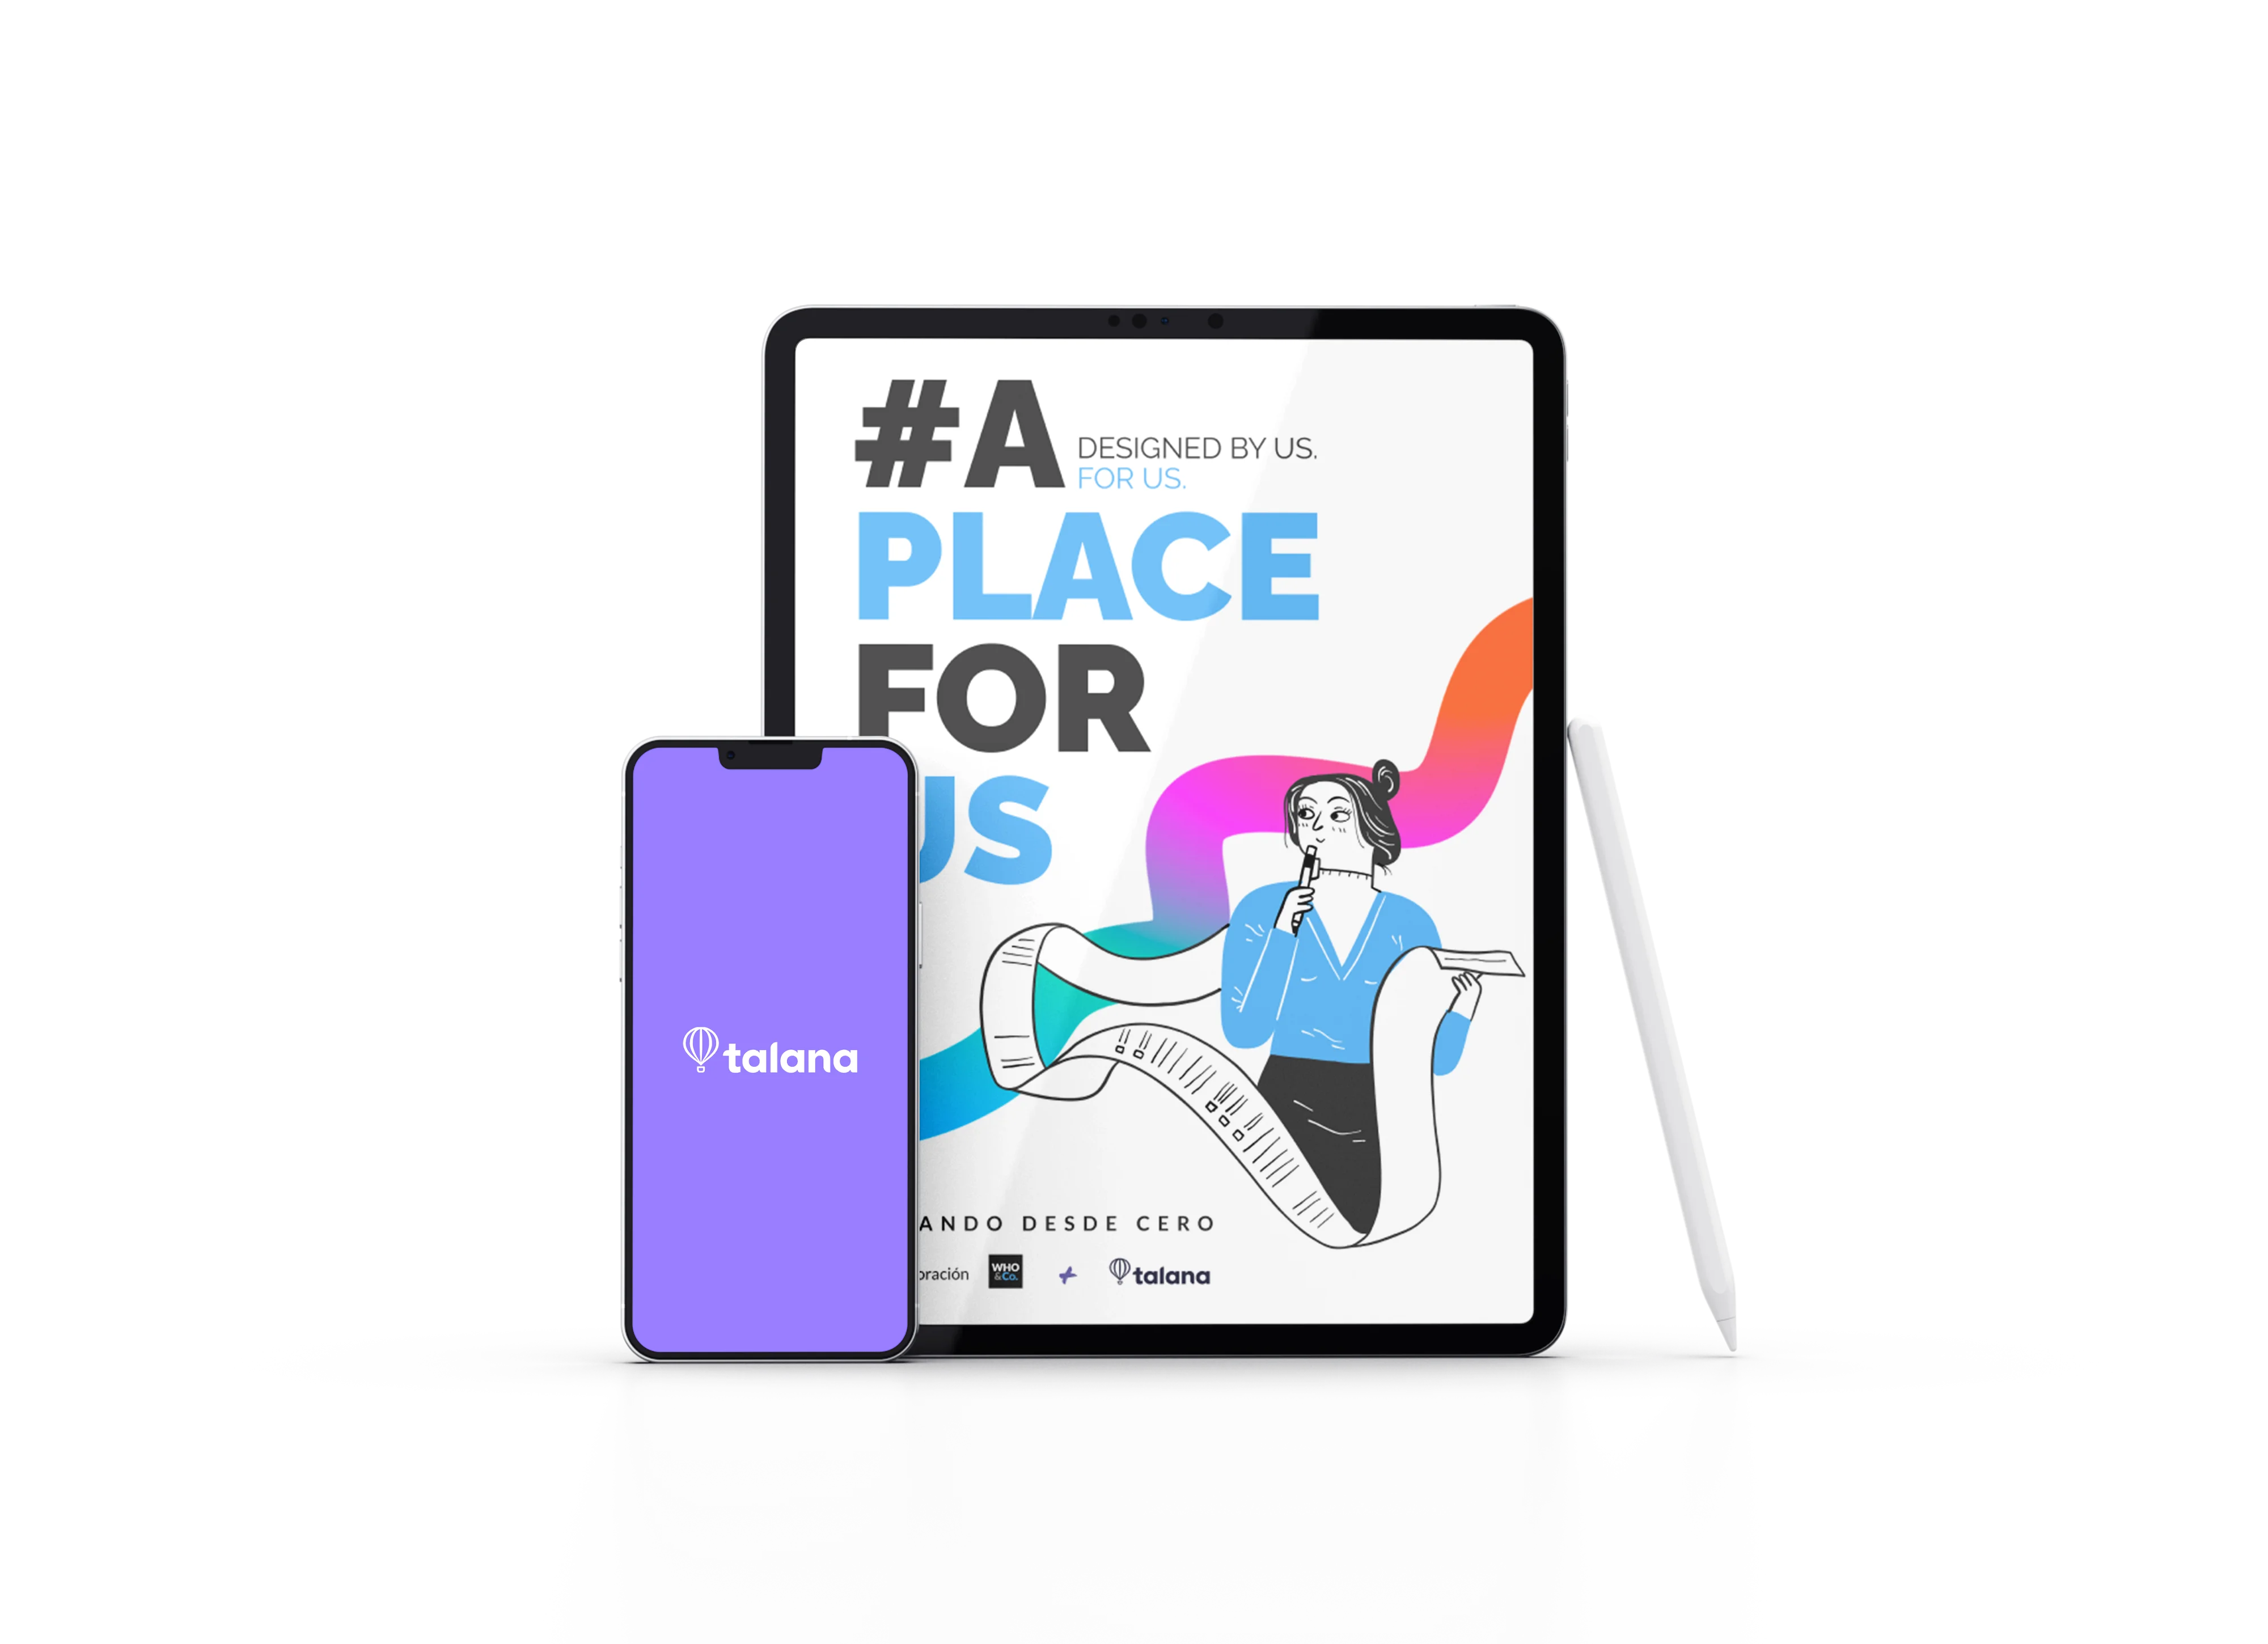 ebook-a-place-for-us